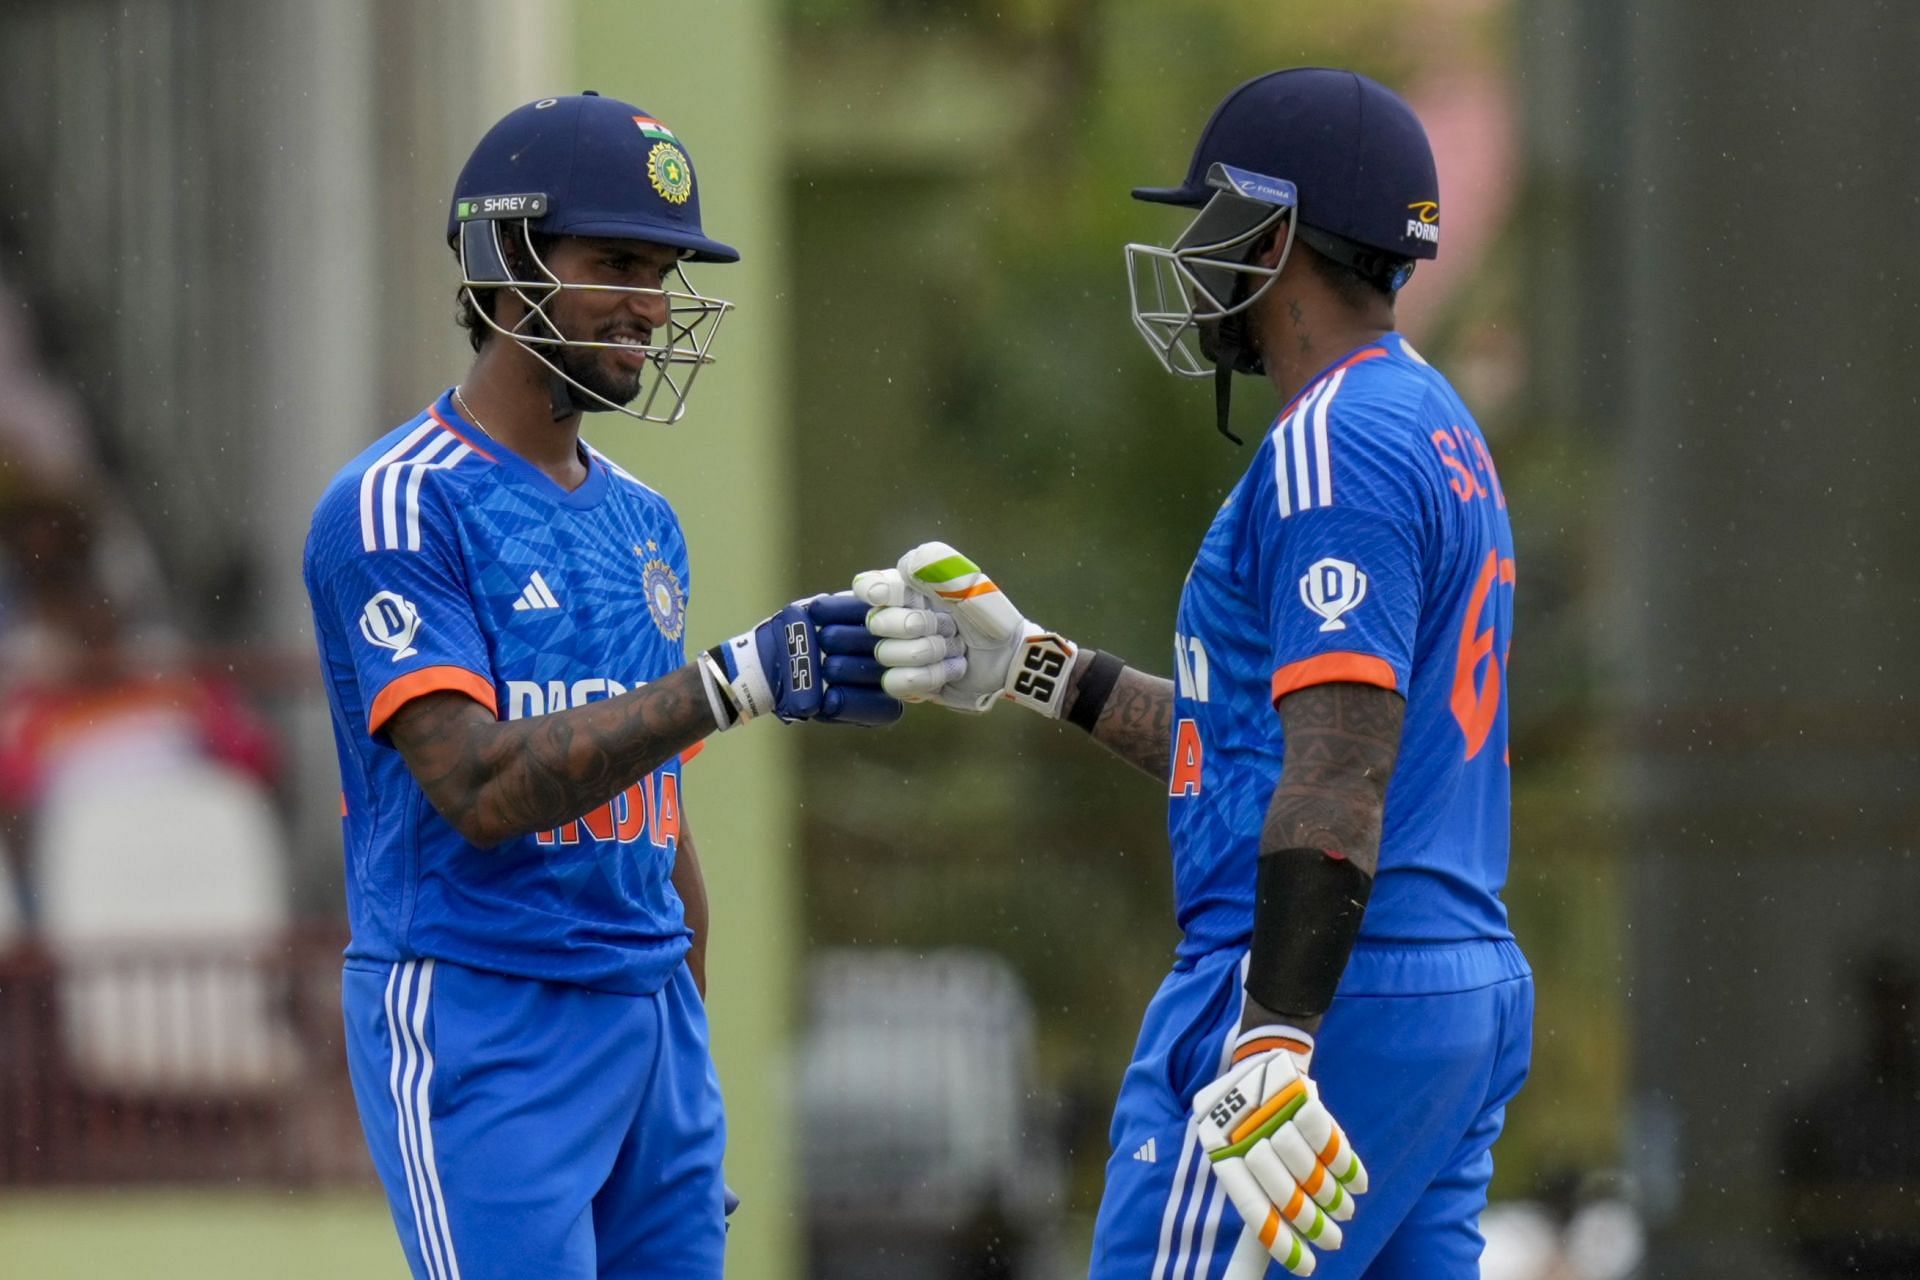 Tilak Varma and Suryakumar Yadav strung together a match-winning partnership in the third T20I against the West Indies.